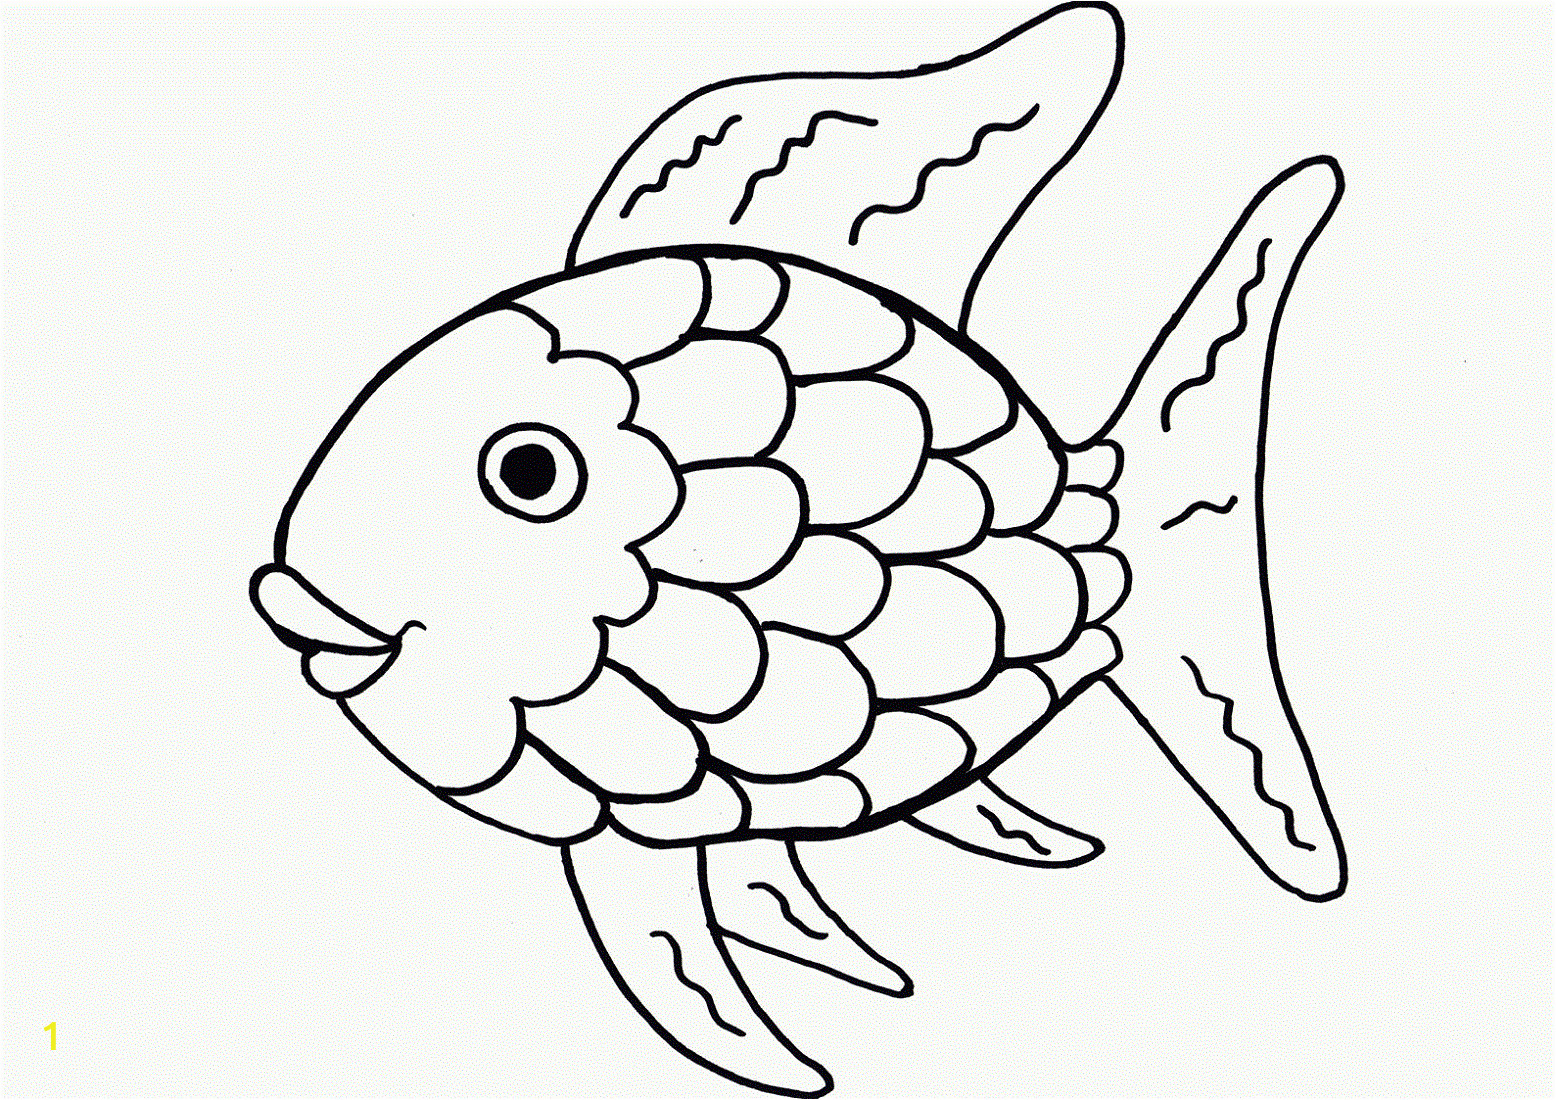 Rainbow Fish Coloring Pages for Kids Rainbow Fish Coloring Printable for Kids